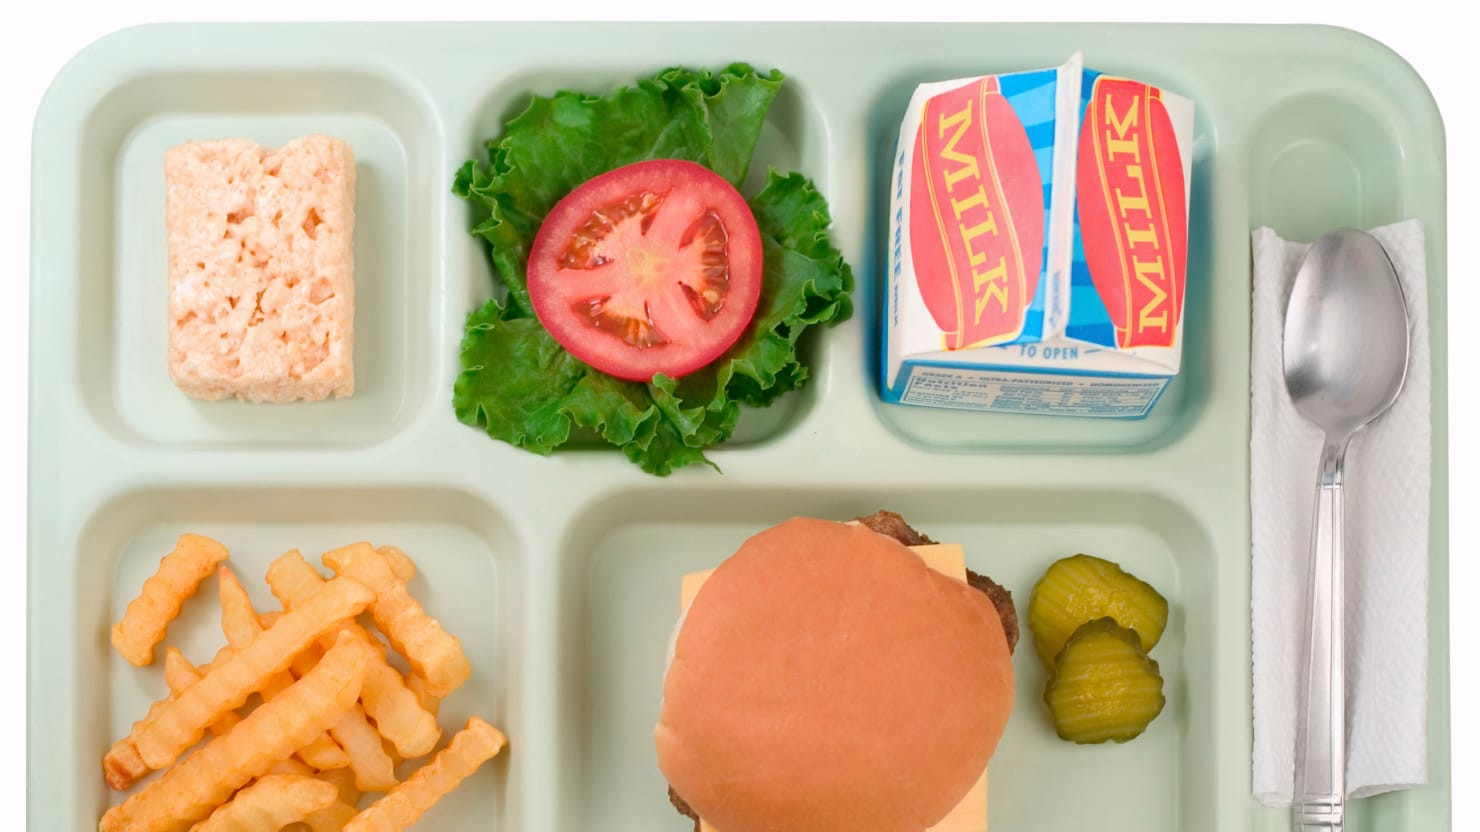 Benefits Of Healthy School Lunches
 The Government is Still Failing Kids on School Lunches